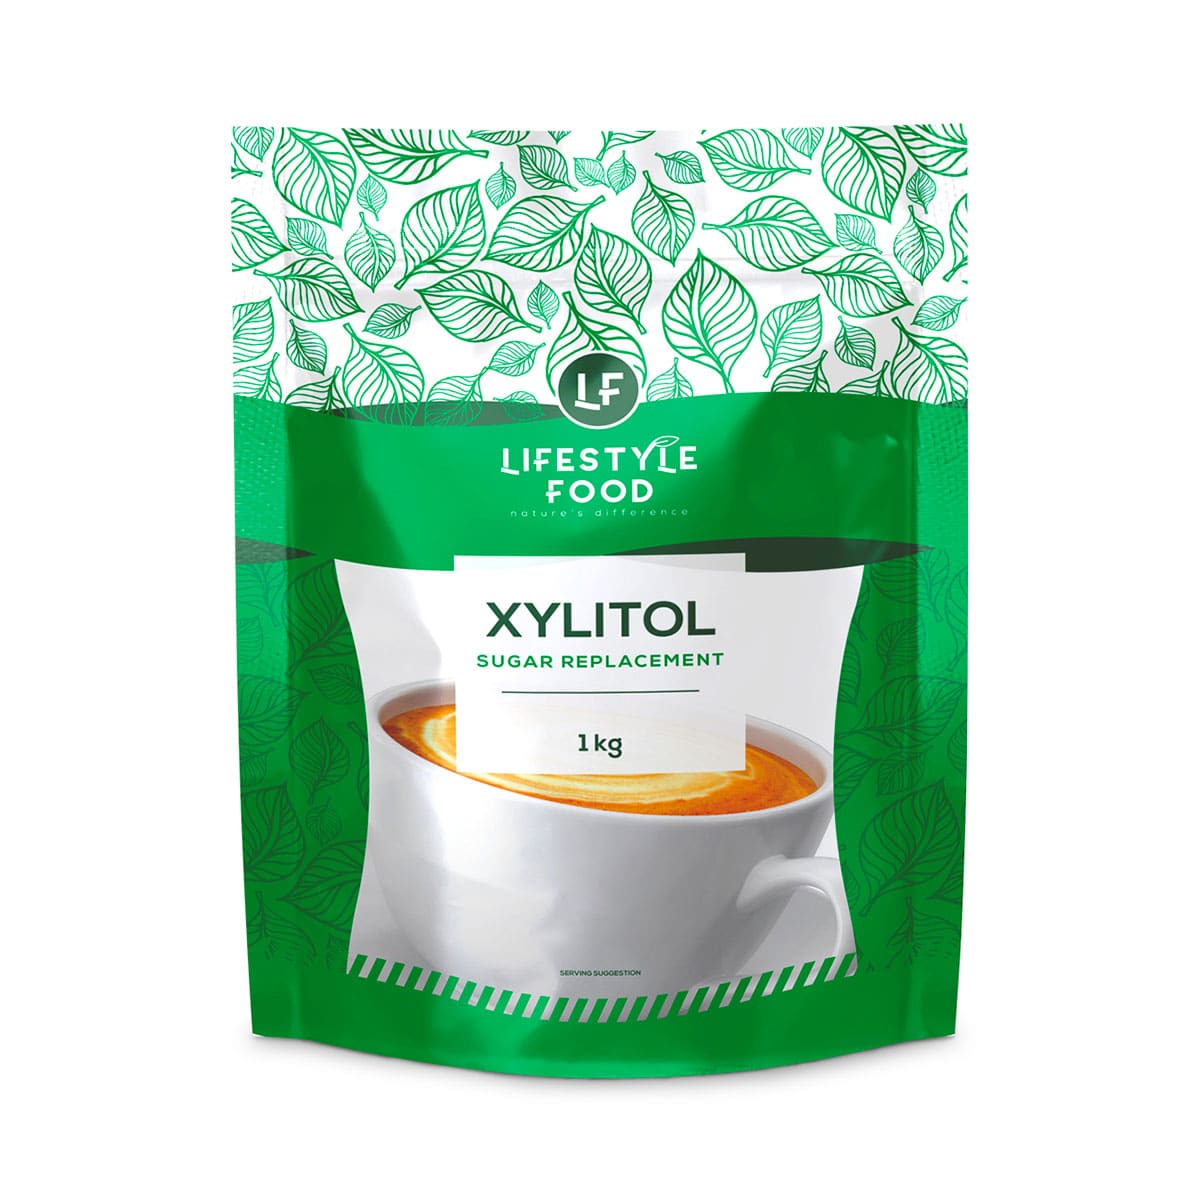 Lifestyle Food Xylitol Sugar Replacement - 1kg